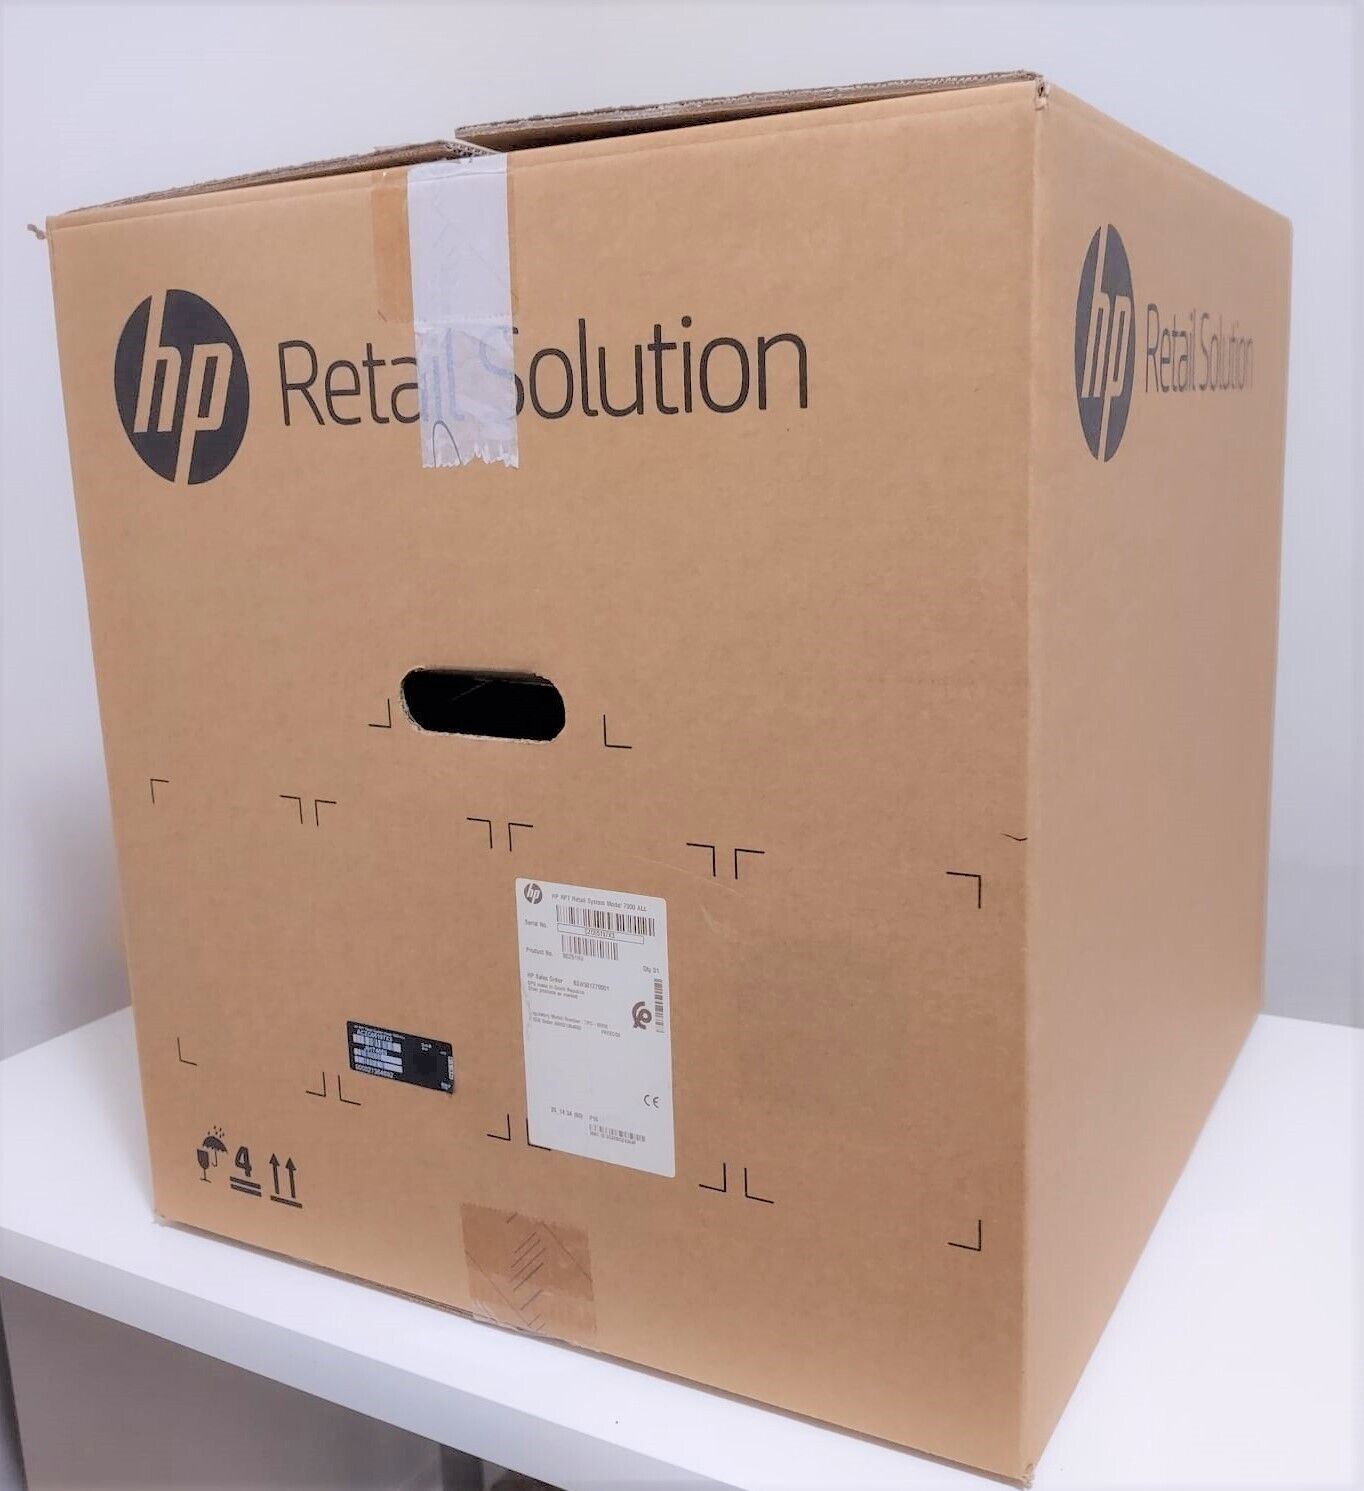 HP RP7 Retail System 7800 - all-in-one - Core i3 2120 3.3 GHz - vPro - 4 GB - HDD 500 GB - LED 17